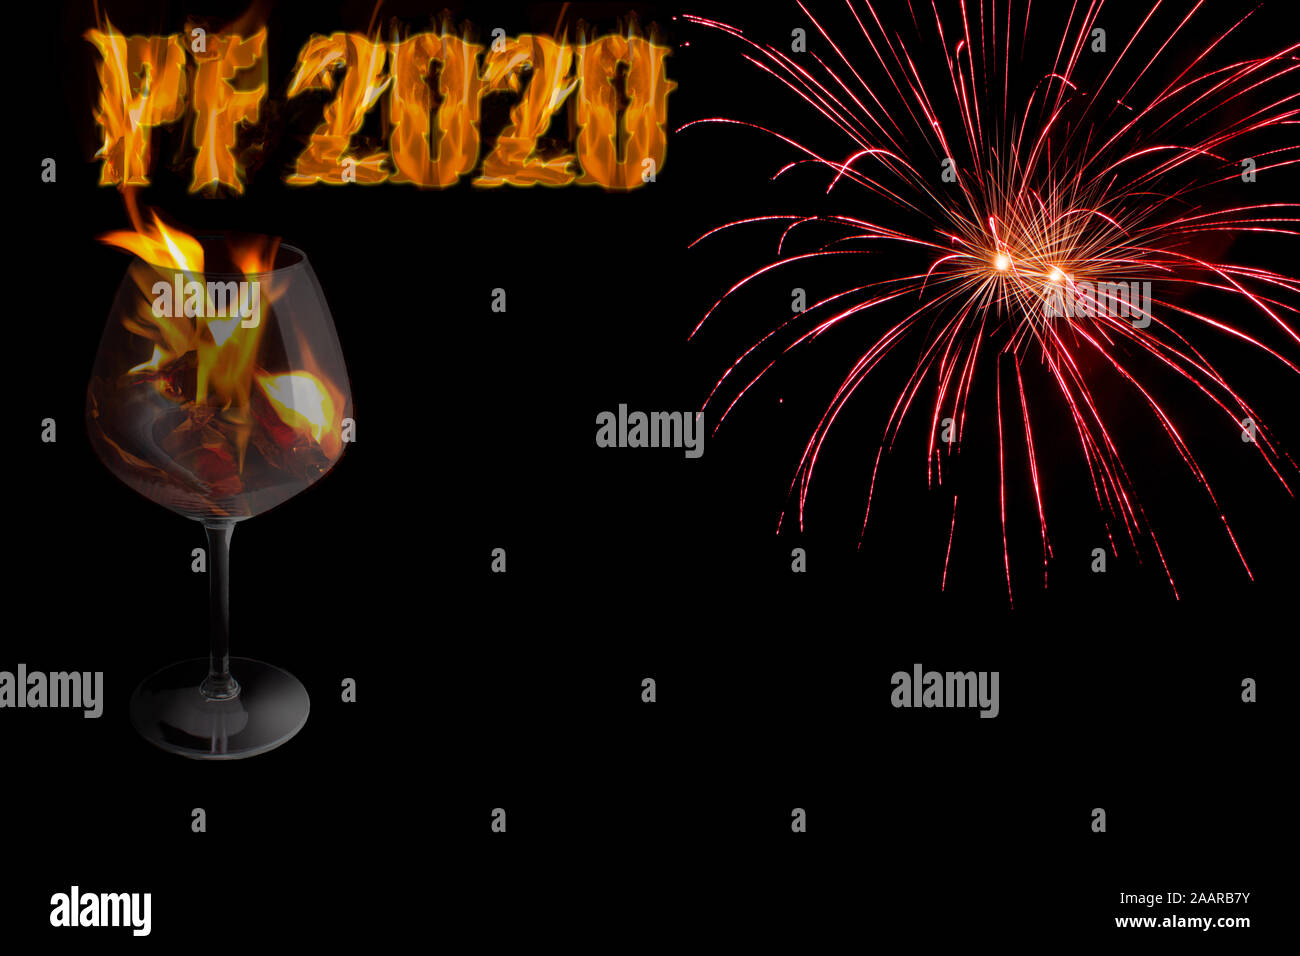 PF 2020 - happy New Year with a glass in a fire and red fireworks on black background with free space for text. Stock Photo